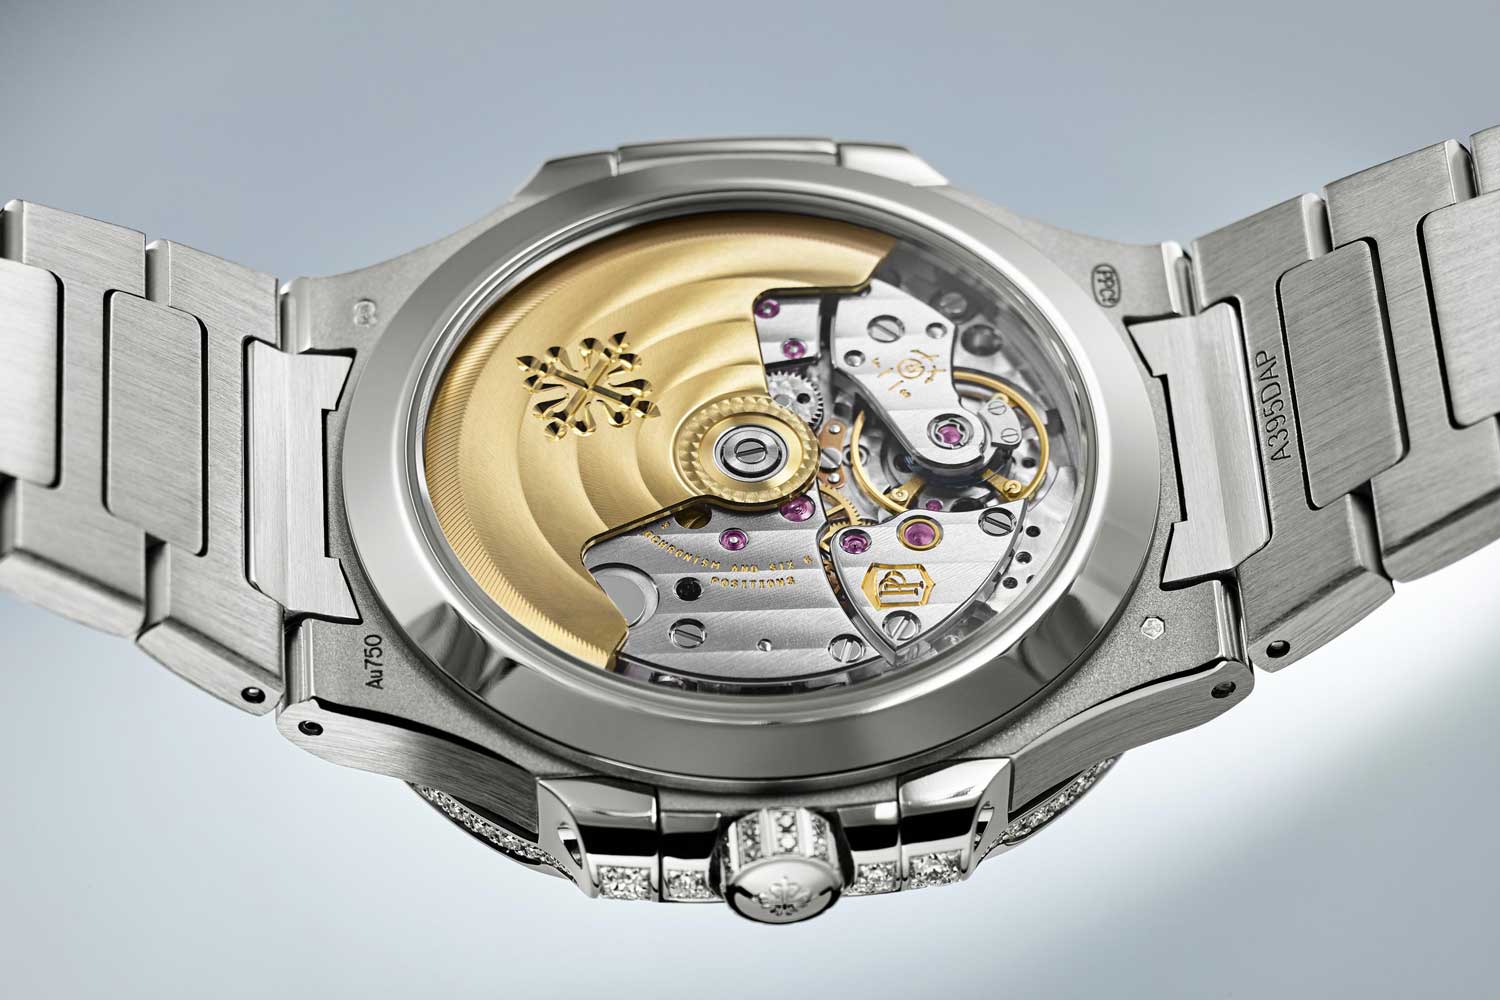 The watch is powered by Patek’s caliber 324 S automatic movement, the same movement that powers Ref. 5711.